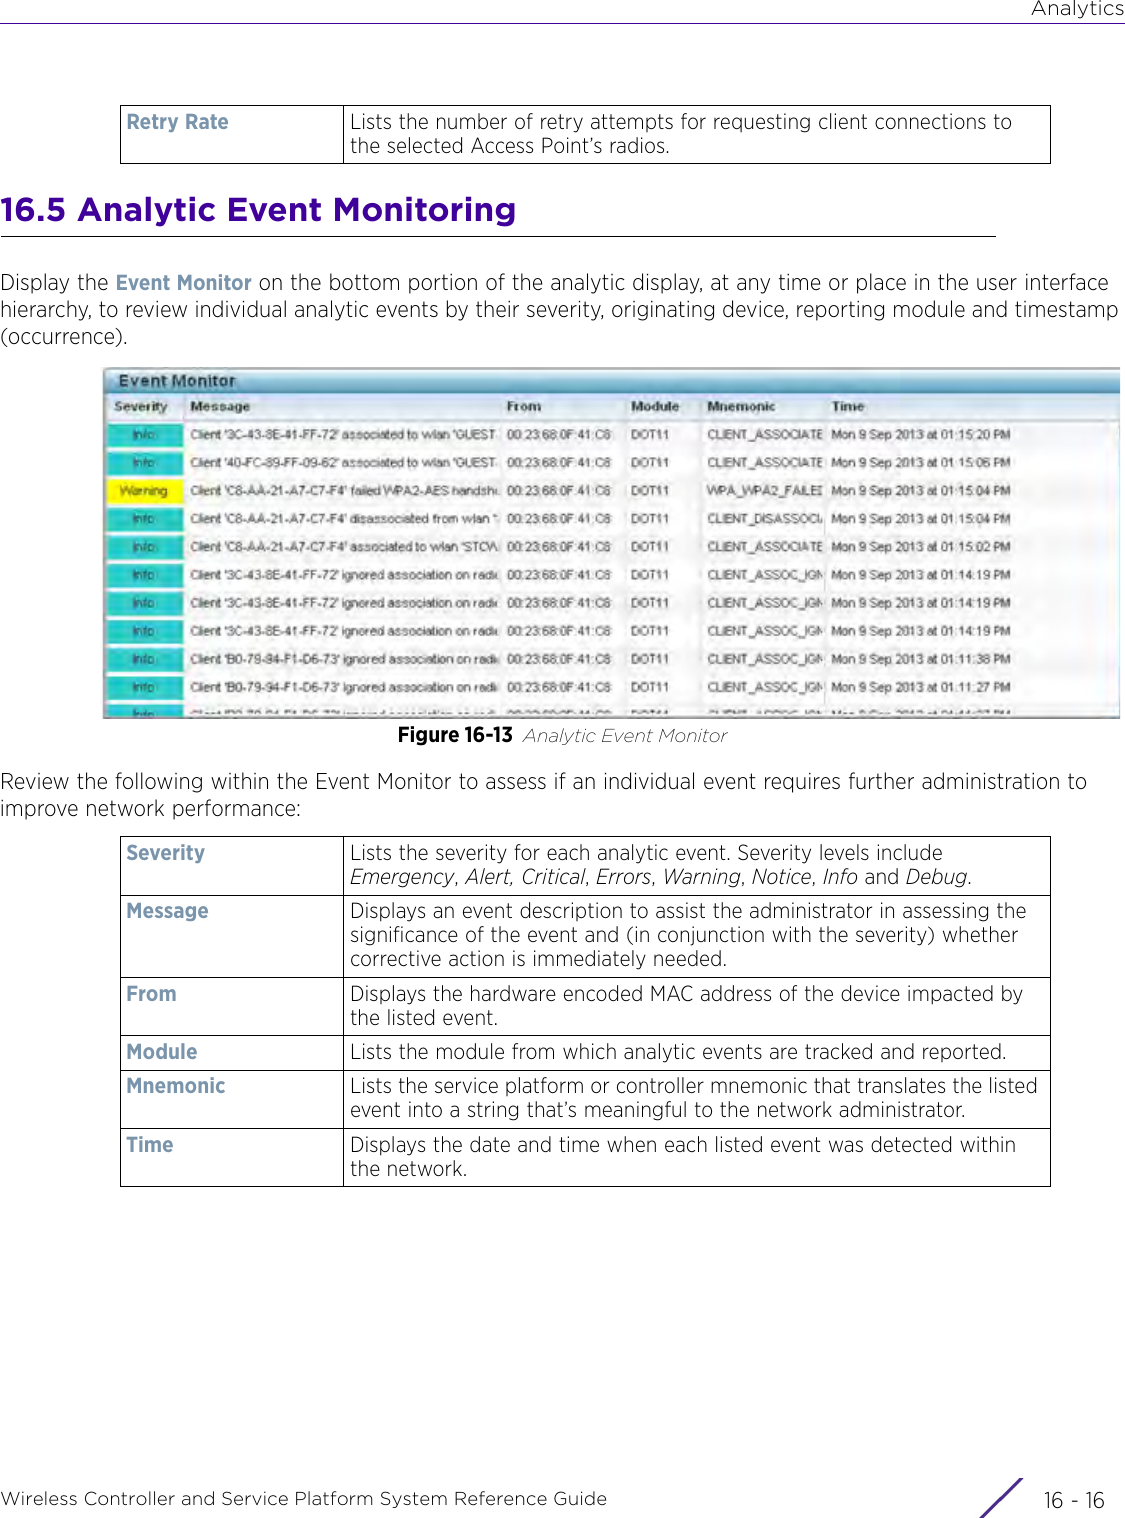 AnalyticsWireless Controller and Service Platform System Reference Guide  16 - 1616.5 Analytic Event MonitoringDisplay the Event Monitor on the bottom portion of the analytic display, at any time or place in the user interface hierarchy, to review individual analytic events by their severity, originating device, reporting module and timestamp (occurrence).Figure 16-13 Analytic Event MonitorReview the following within the Event Monitor to assess if an individual event requires further administration to improve network performance:Retry Rate Lists the number of retry attempts for requesting client connections to the selected Access Point’s radios. Severity Lists the severity for each analytic event. Severity levels include Emergency, Alert, Critical, Errors, Warning, Notice, Info and Debug. Message Displays an event description to assist the administrator in assessing the significance of the event and (in conjunction with the severity) whether corrective action is immediately needed.From Displays the hardware encoded MAC address of the device impacted by the listed event.Module Lists the module from which analytic events are tracked and reported.Mnemonic Lists the service platform or controller mnemonic that translates the listed event into a string that’s meaningful to the network administrator.Time Displays the date and time when each listed event was detected within the network.